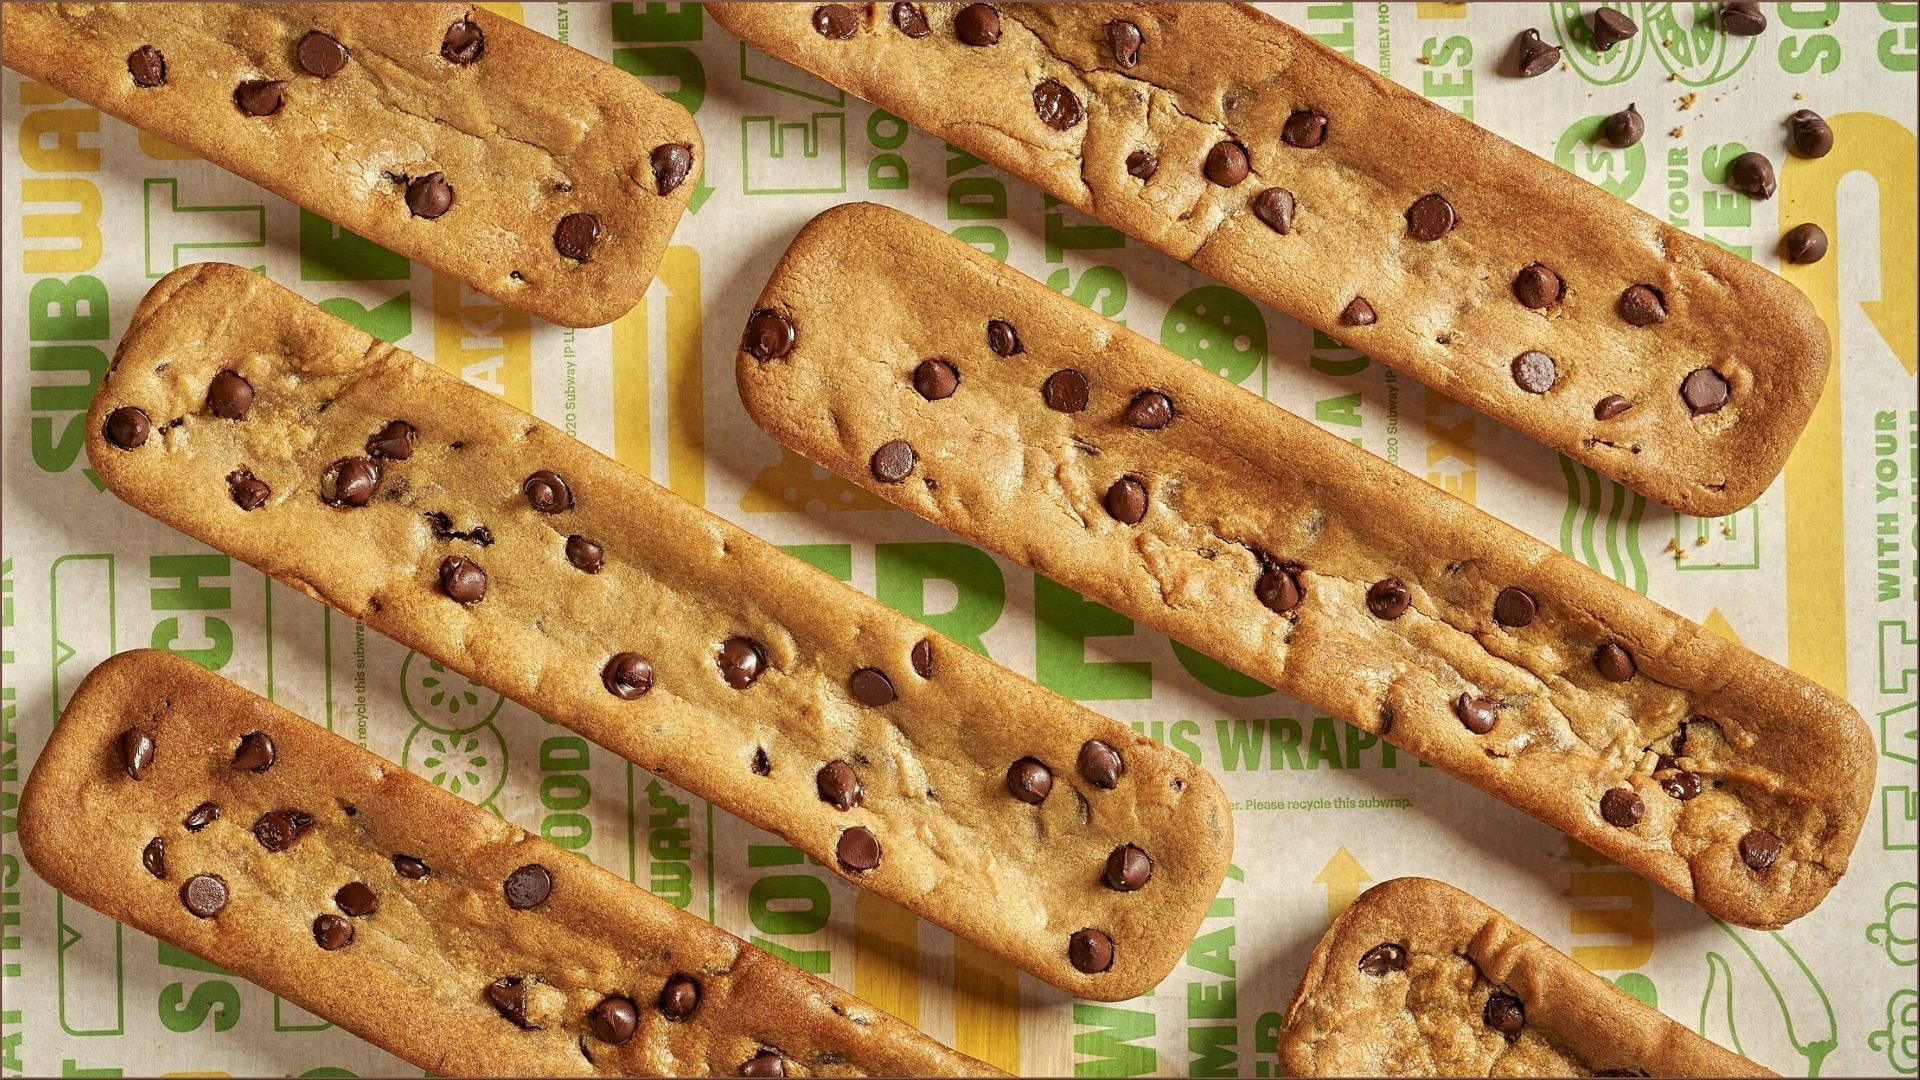 The free footlong cookie can be availed with the order of any footlong sub sandwich (Image via Subway)